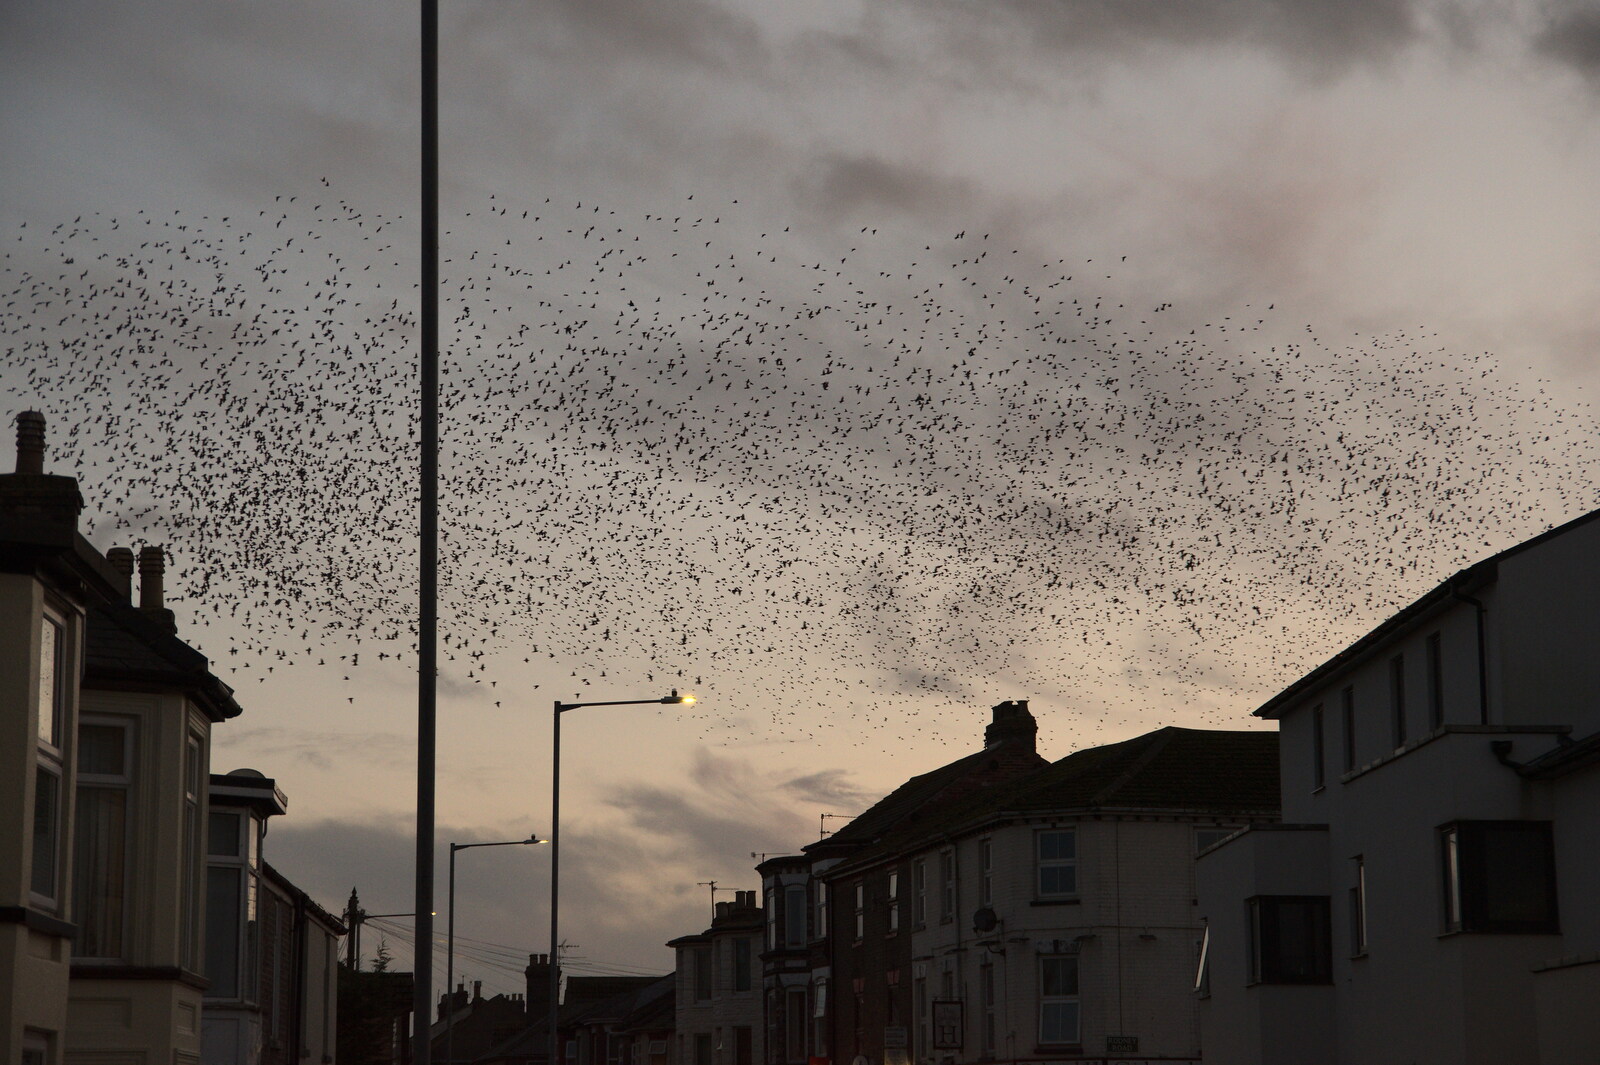 More starling murmurations from The Hippodrome Christmas Spectacular, Great Yarmouth, Norfolk - 29th December 2022